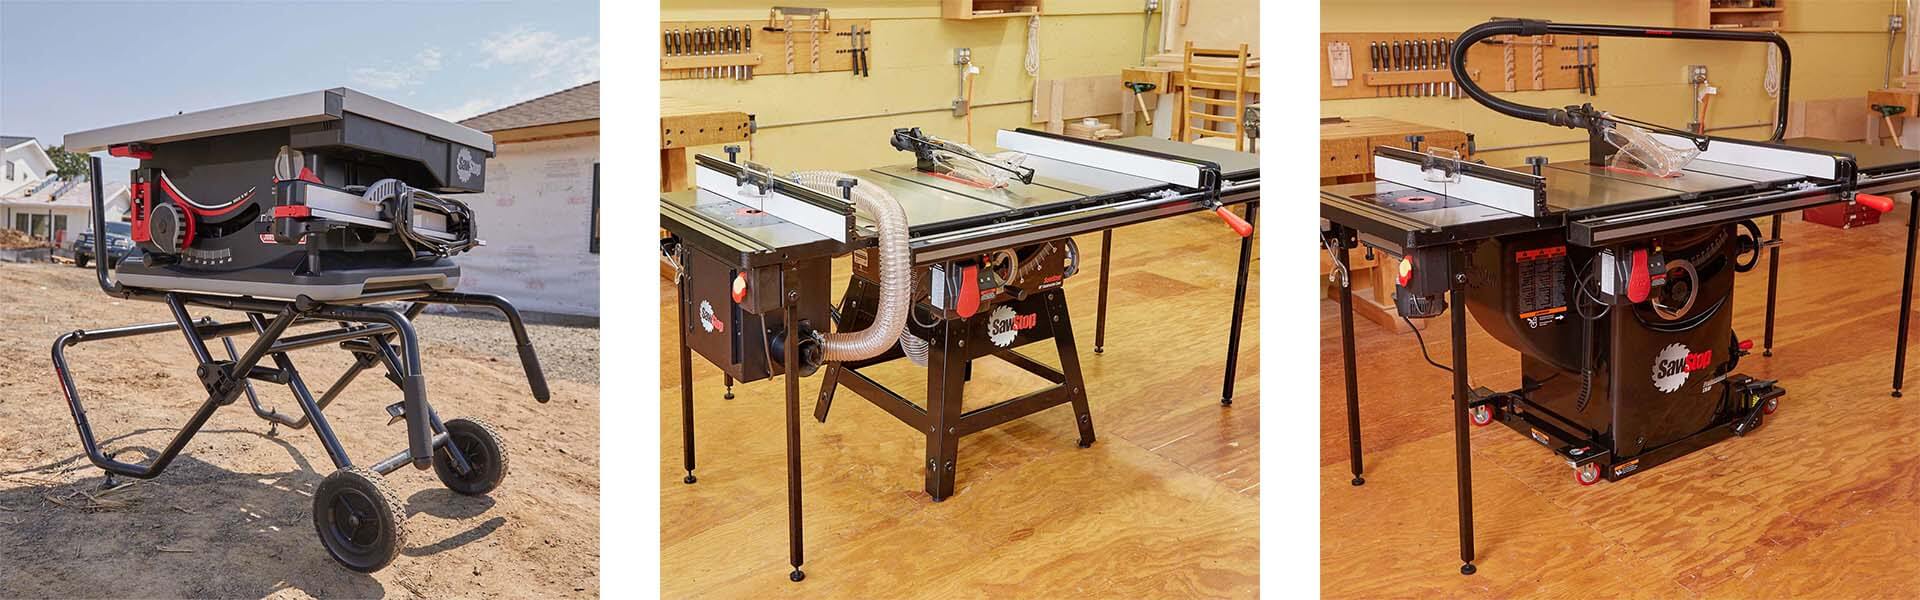 Three different table saws from SawStop